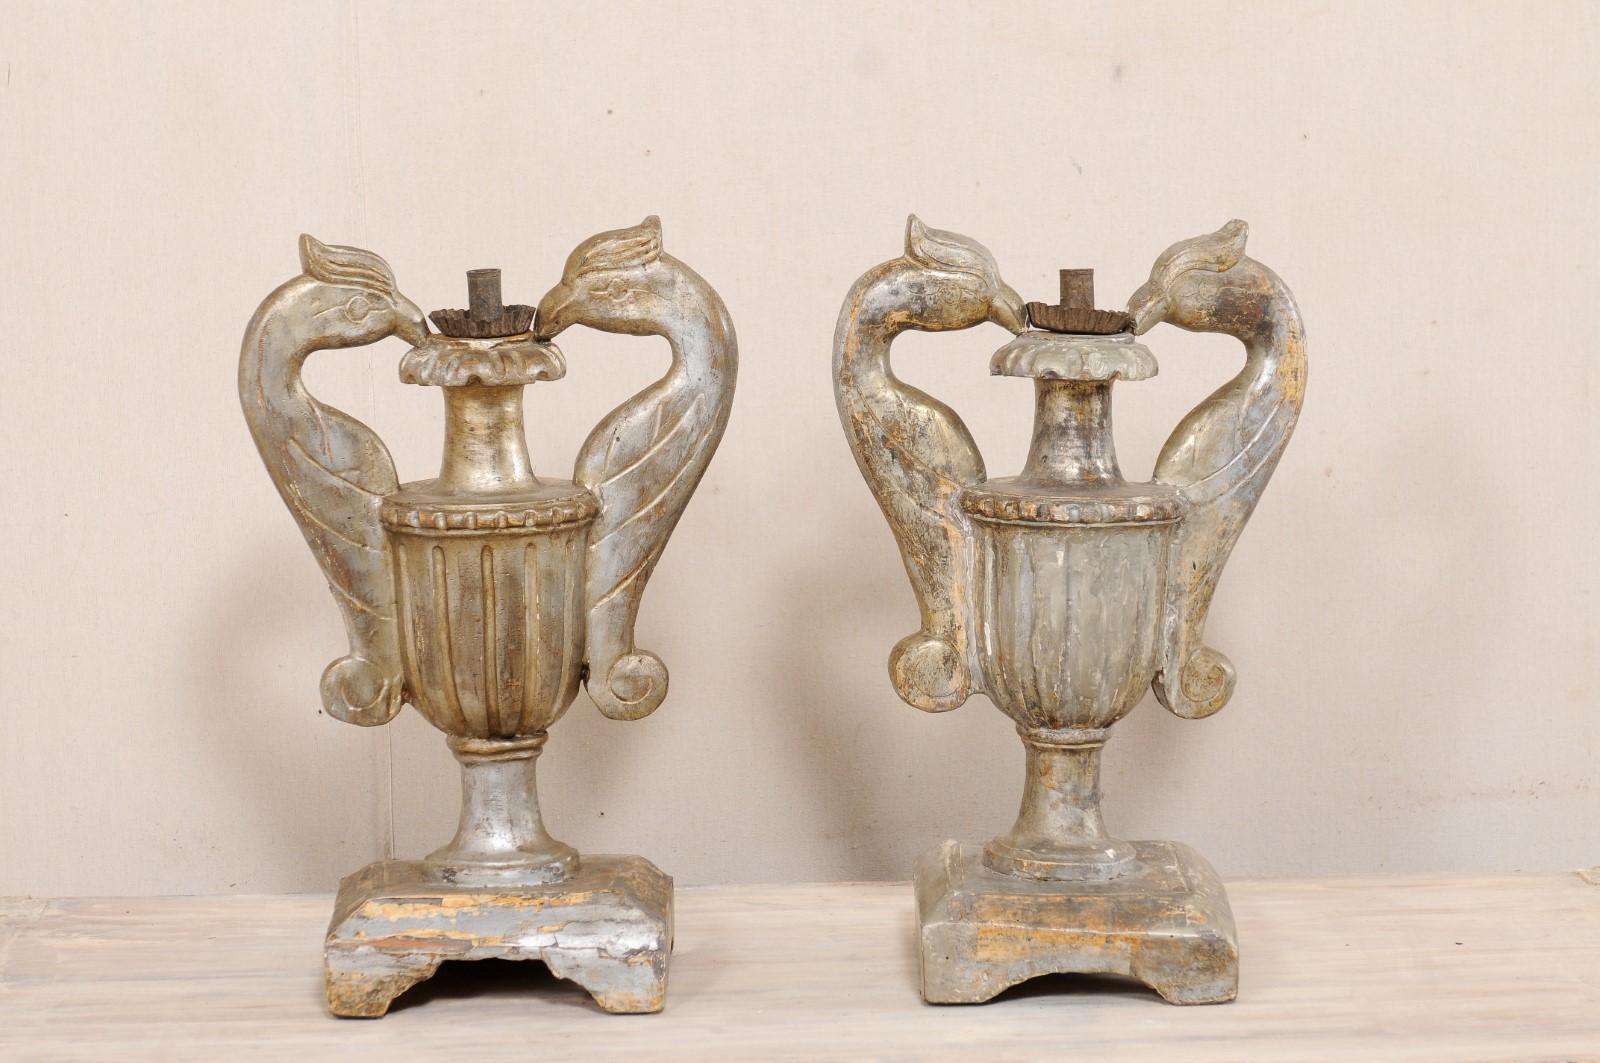 A pair of Italian carved-wood urns, with single candlestick, in bird motif, from the 19th century. These antique single-candlestick holders from Italy each feature three-dimensionally carved urn, with fluted embellishments, and having two handles